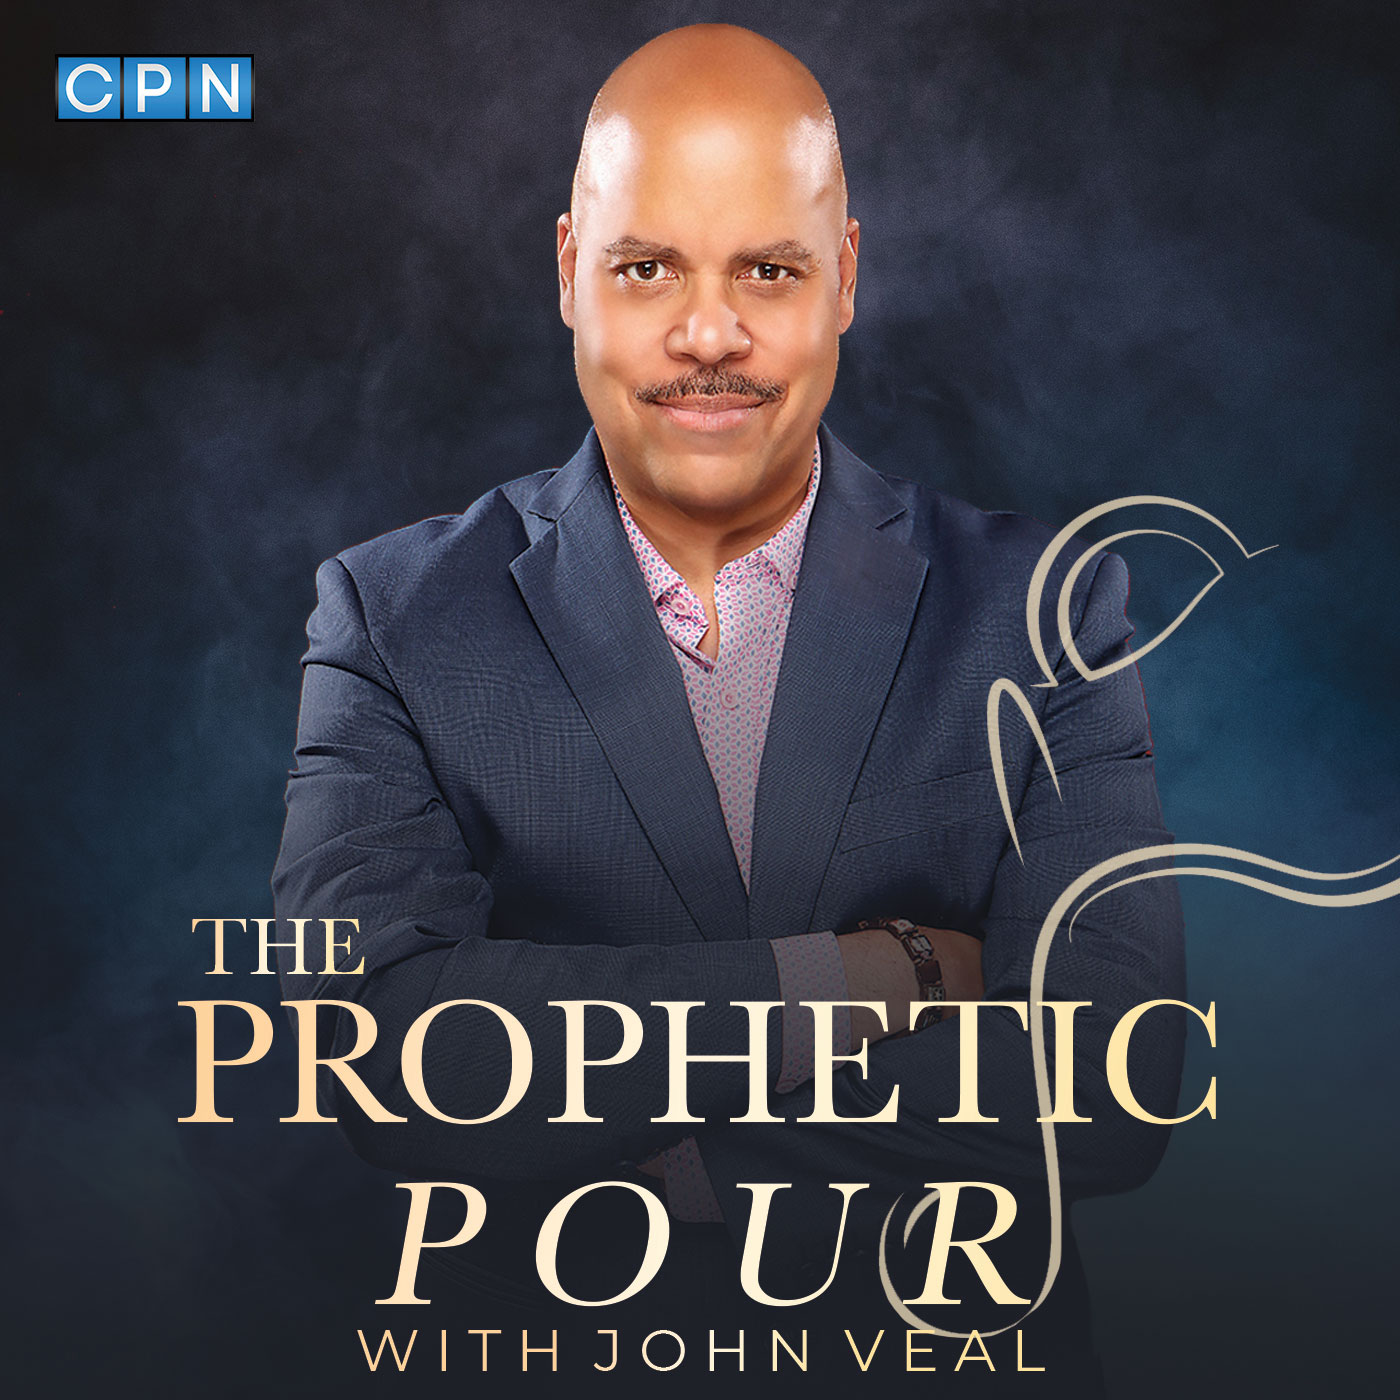 The Devil Knows Your Name! Was The Prophetic Word That You Received Really From God?